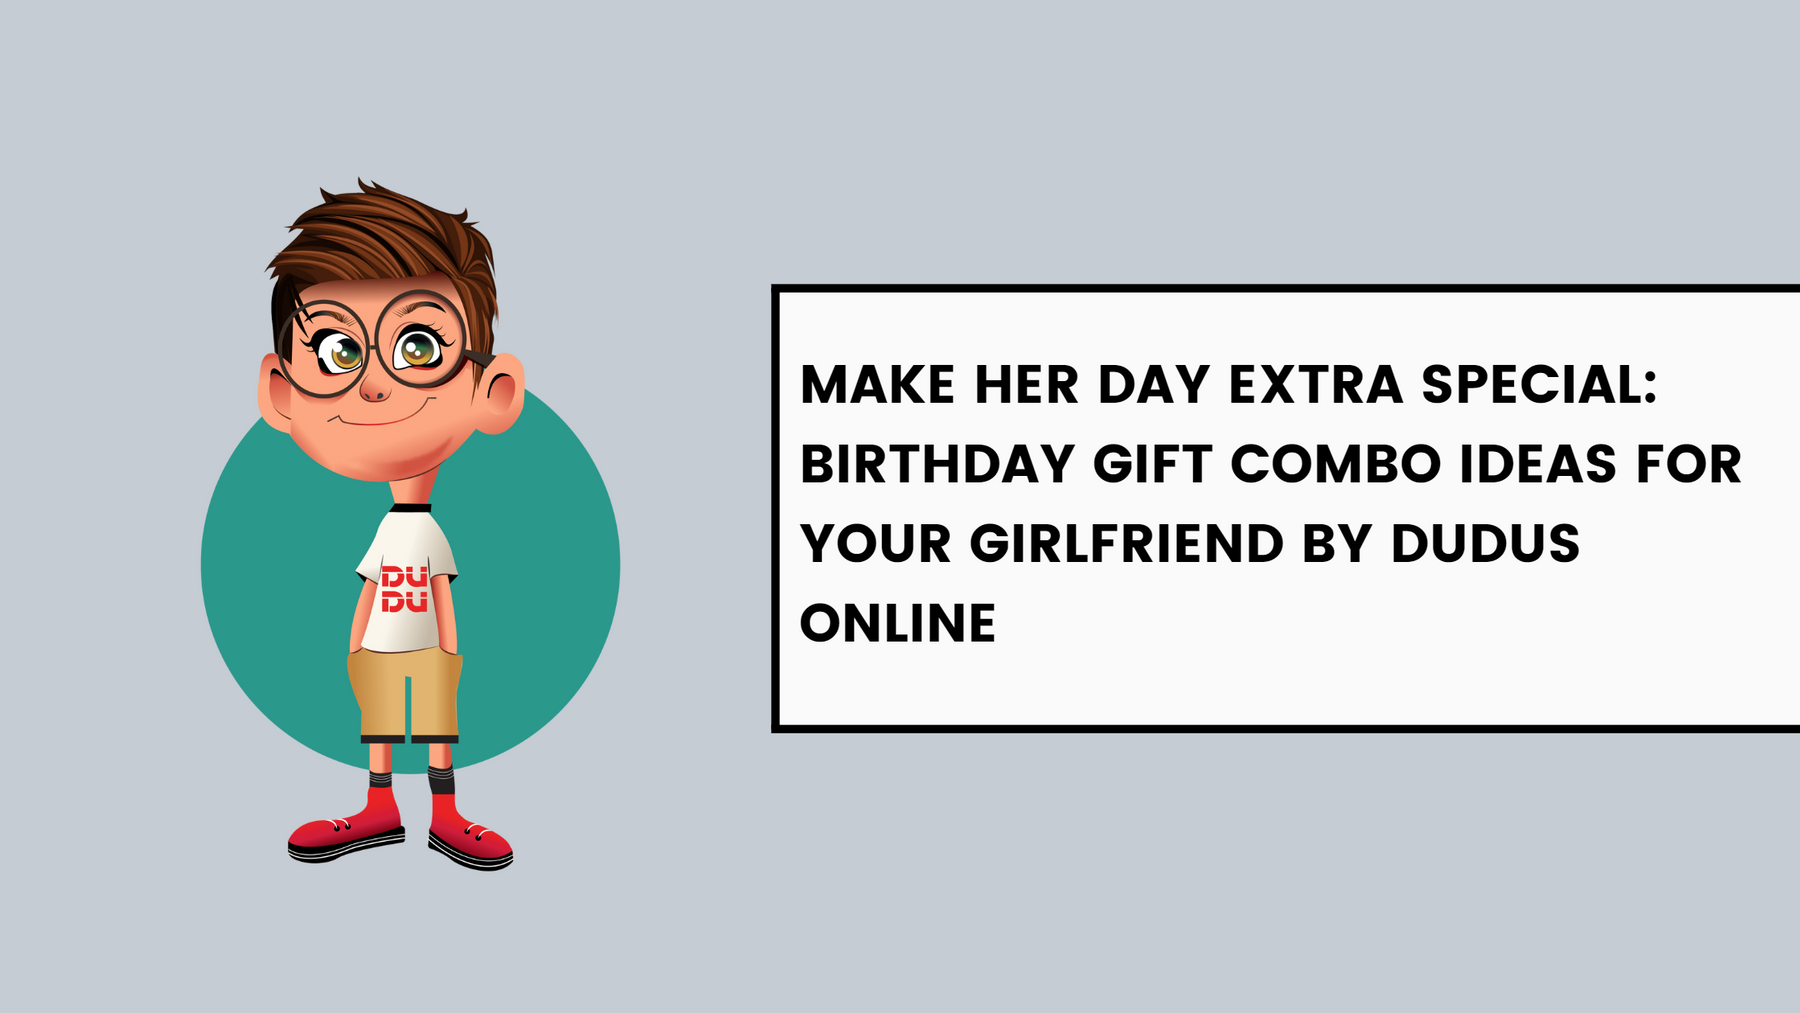 Make Her Day Extra Special: Birthday Gift Combo Ideas For Your Girlfriend By Dudus Online